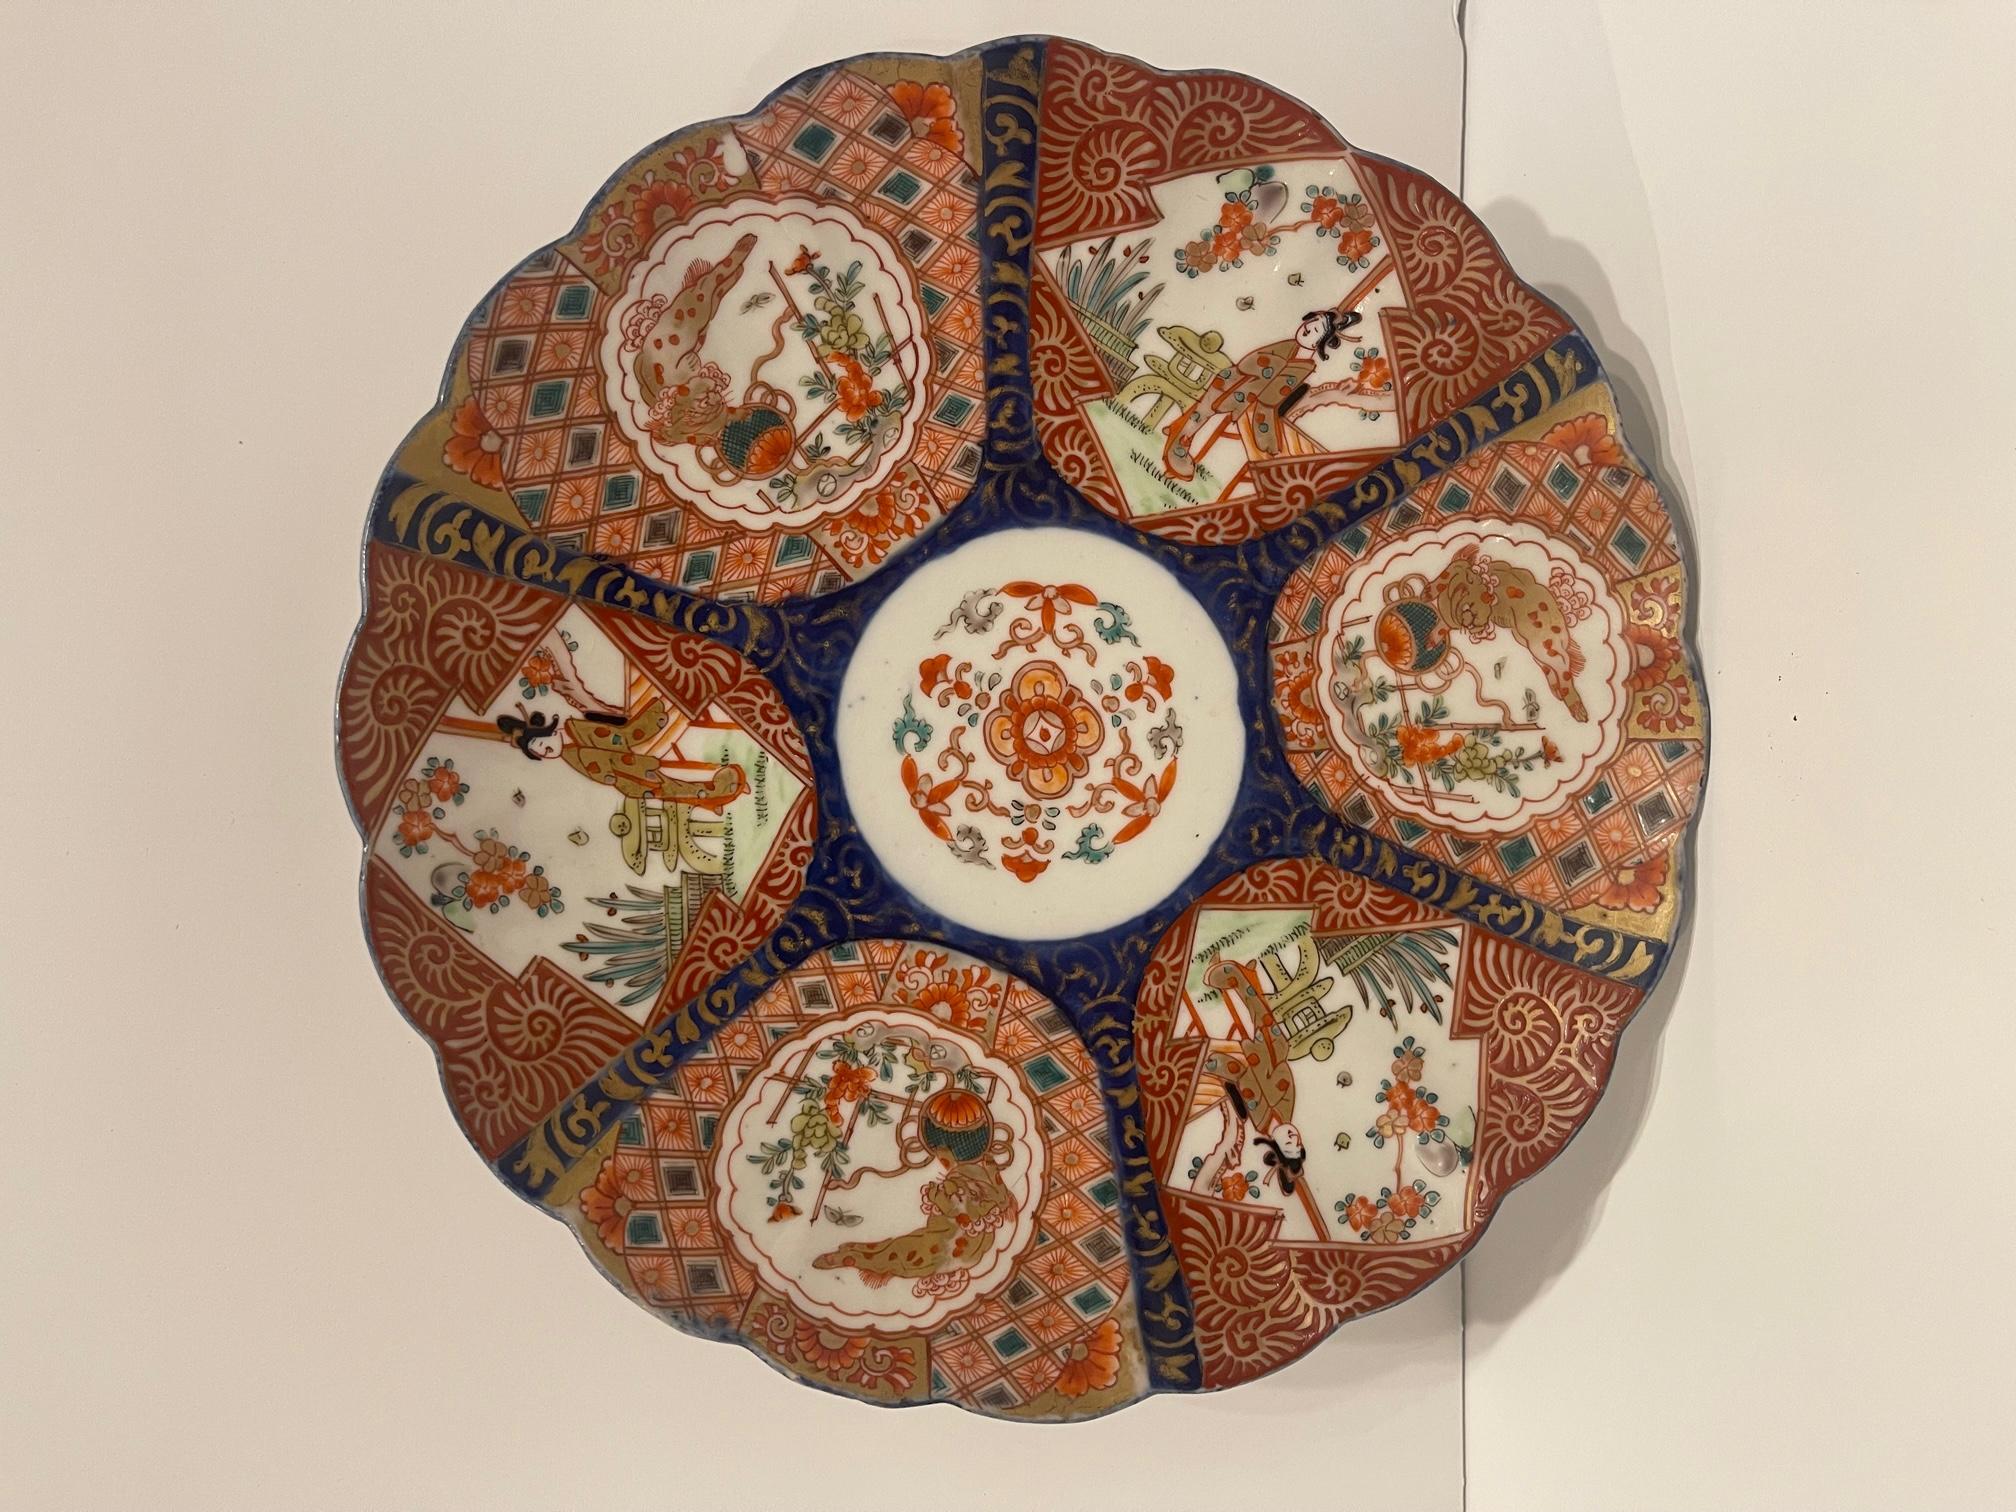 Imari Scalloped Charger Porcelain Plate, 19th Century.  Wood stand included